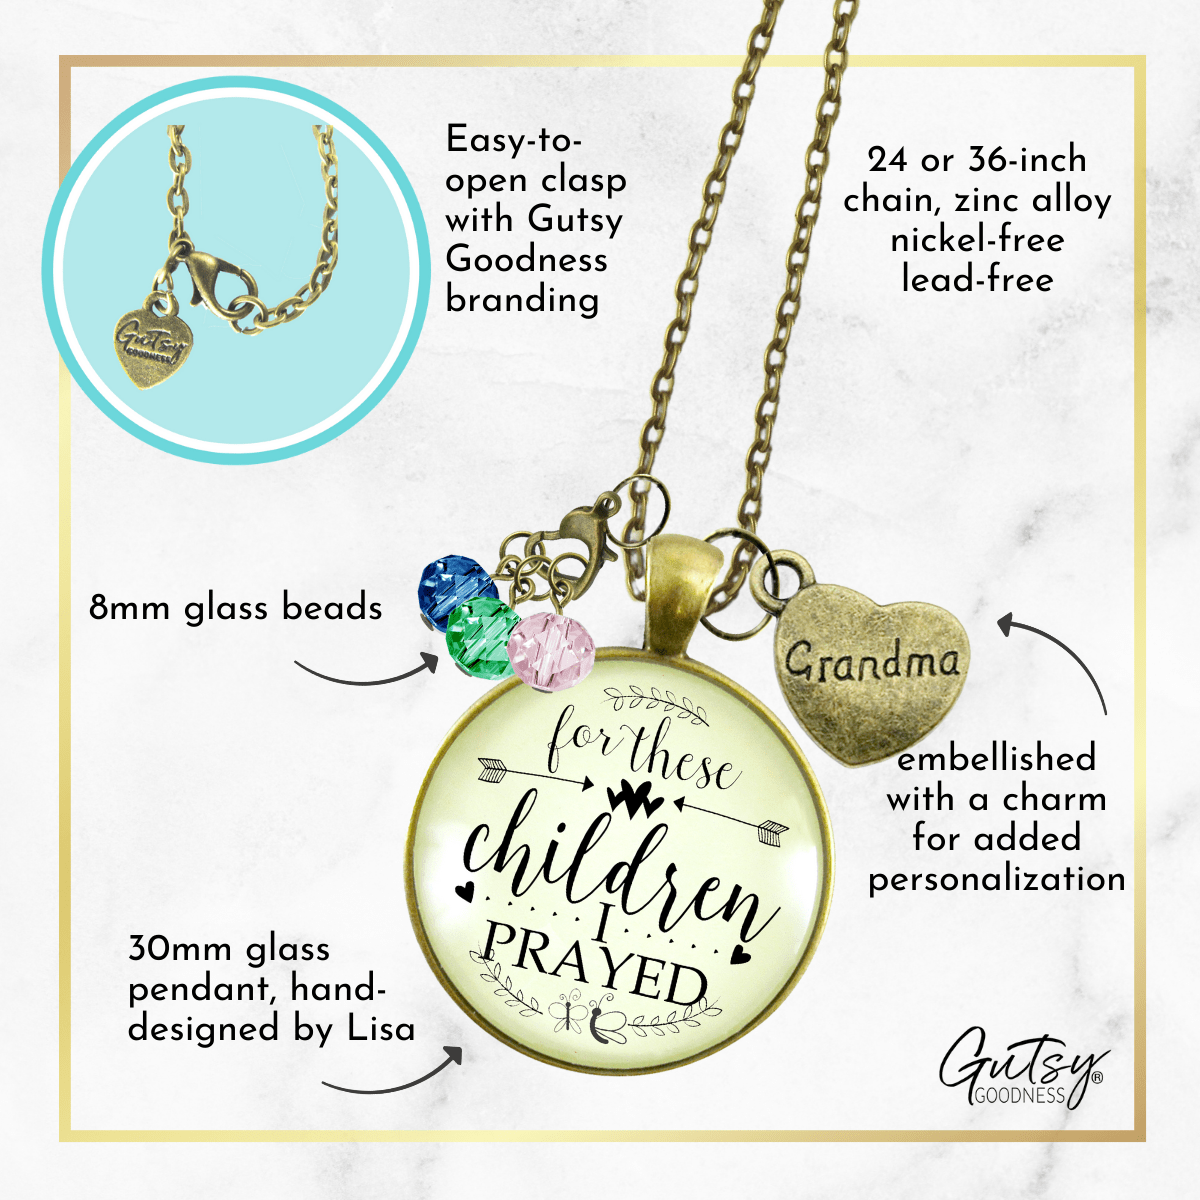 Gutsy Goodness Grandmother Necklace For These Children I Prayed Grandma Faith Charm - Gutsy Goodness;Grandmother Necklace For These Children I Prayed Grandma Faith Charm - Gutsy Goodness Handmade Jewelry Gifts